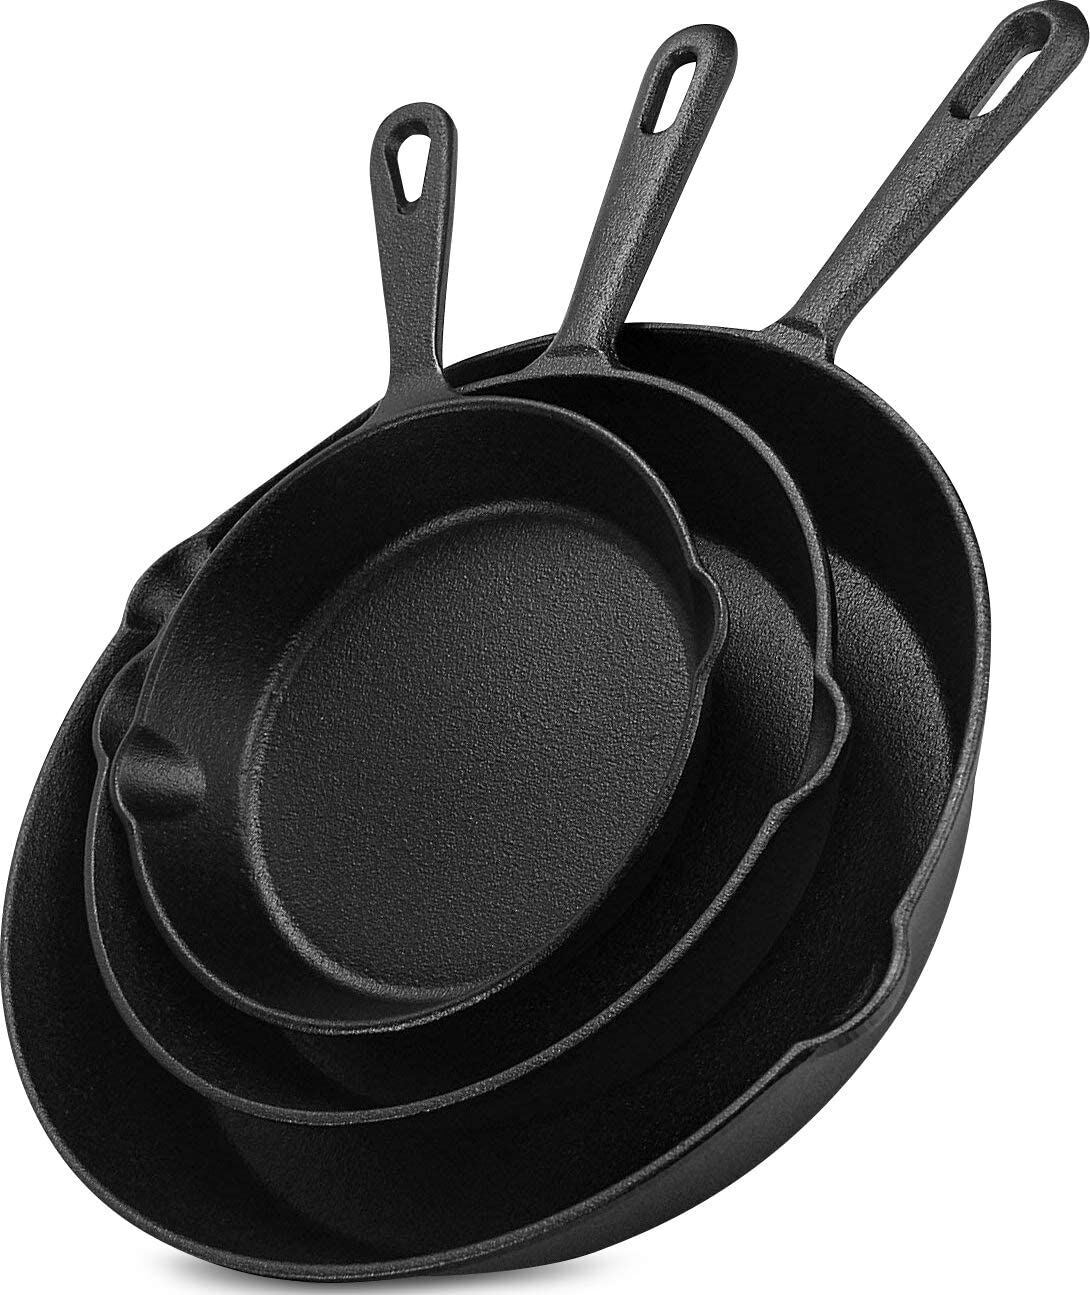 Pre-Seasoned Cast Iron Skillet Set 3-Piece - 6 , 8 and 10 Inches Utopia Kitchen